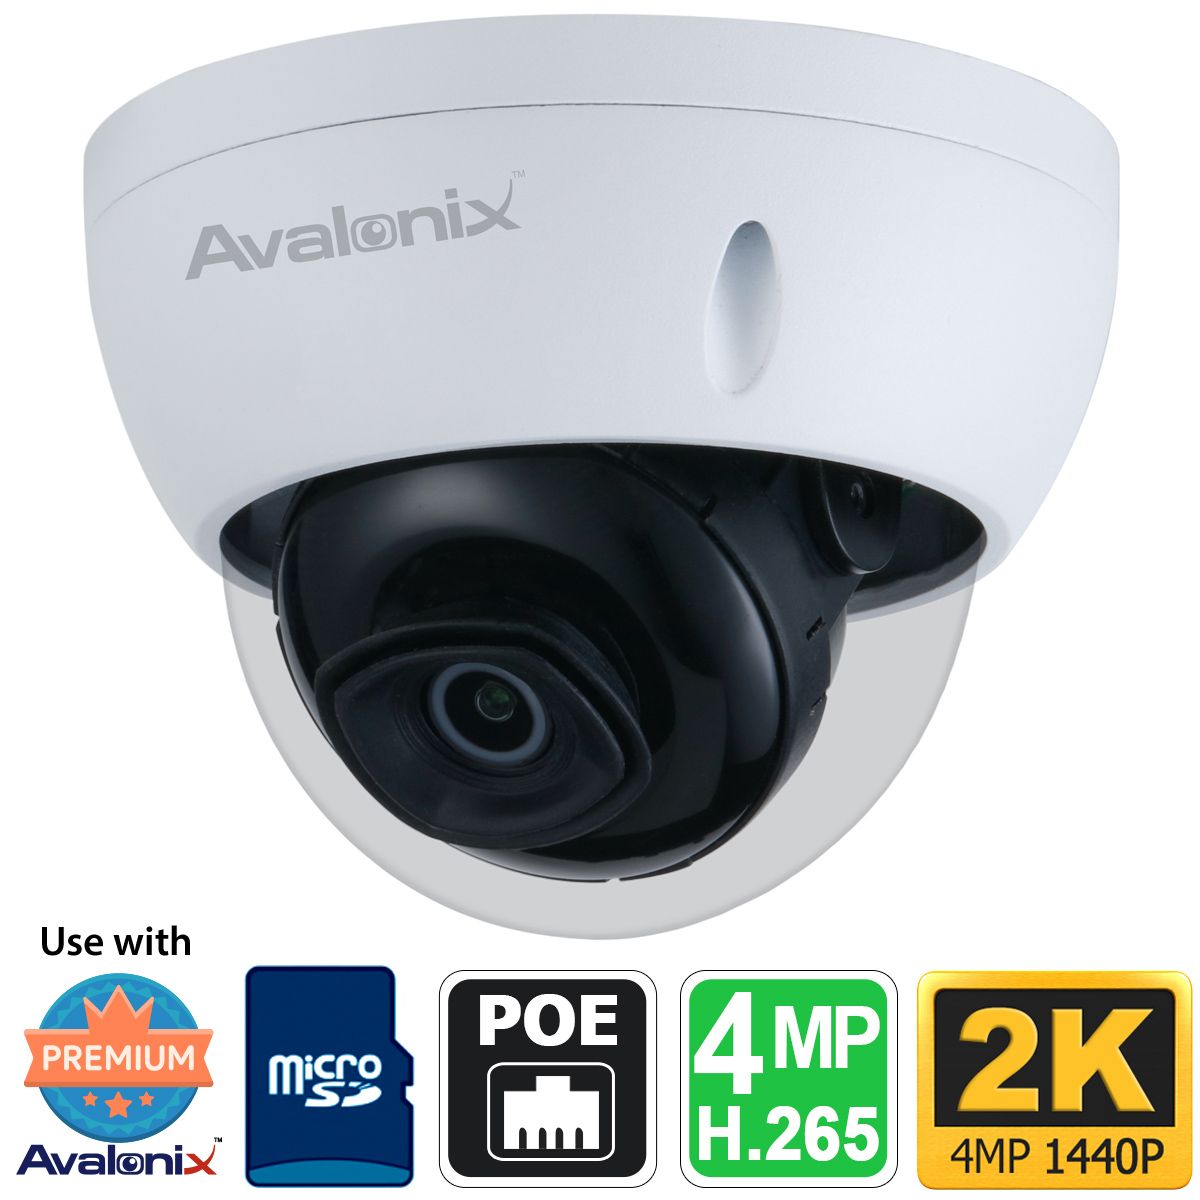 beef curl I've acknowledged 2K H.265 IP Dome Camera, Starlight, 4MP PoE